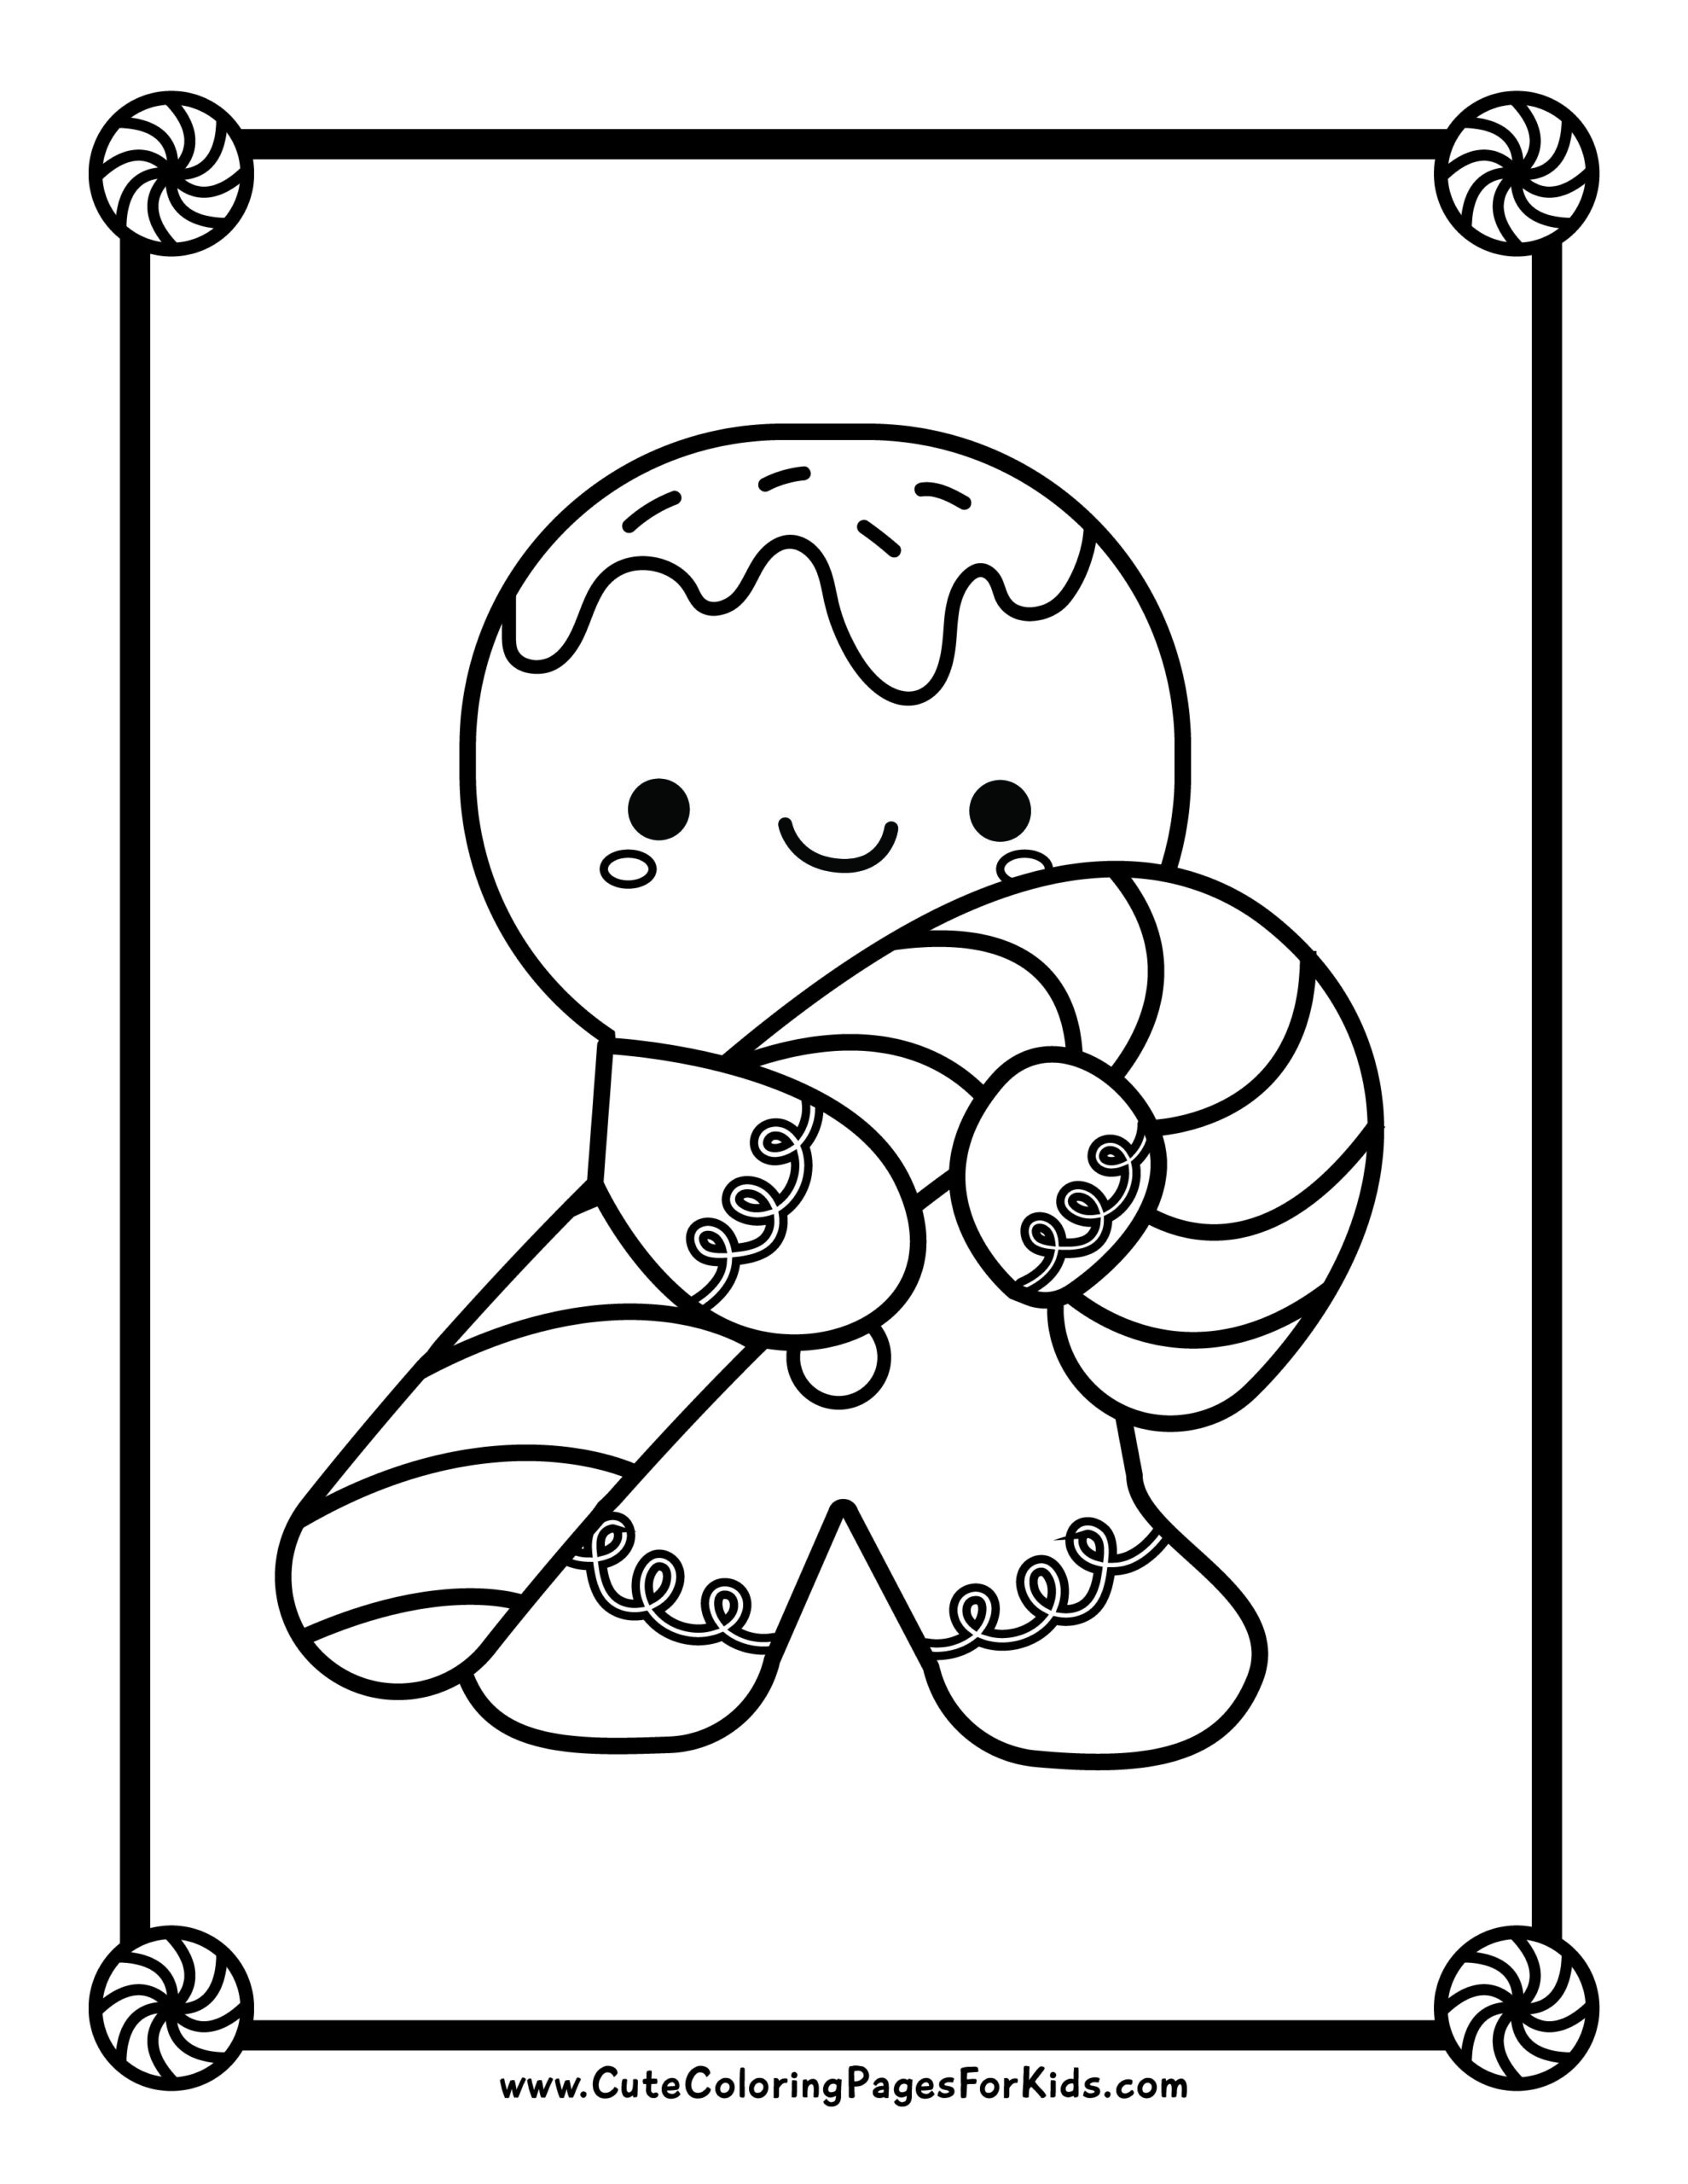 Christmas Coloring Pages: 10 Cute, Free Printable Downloads - Cute